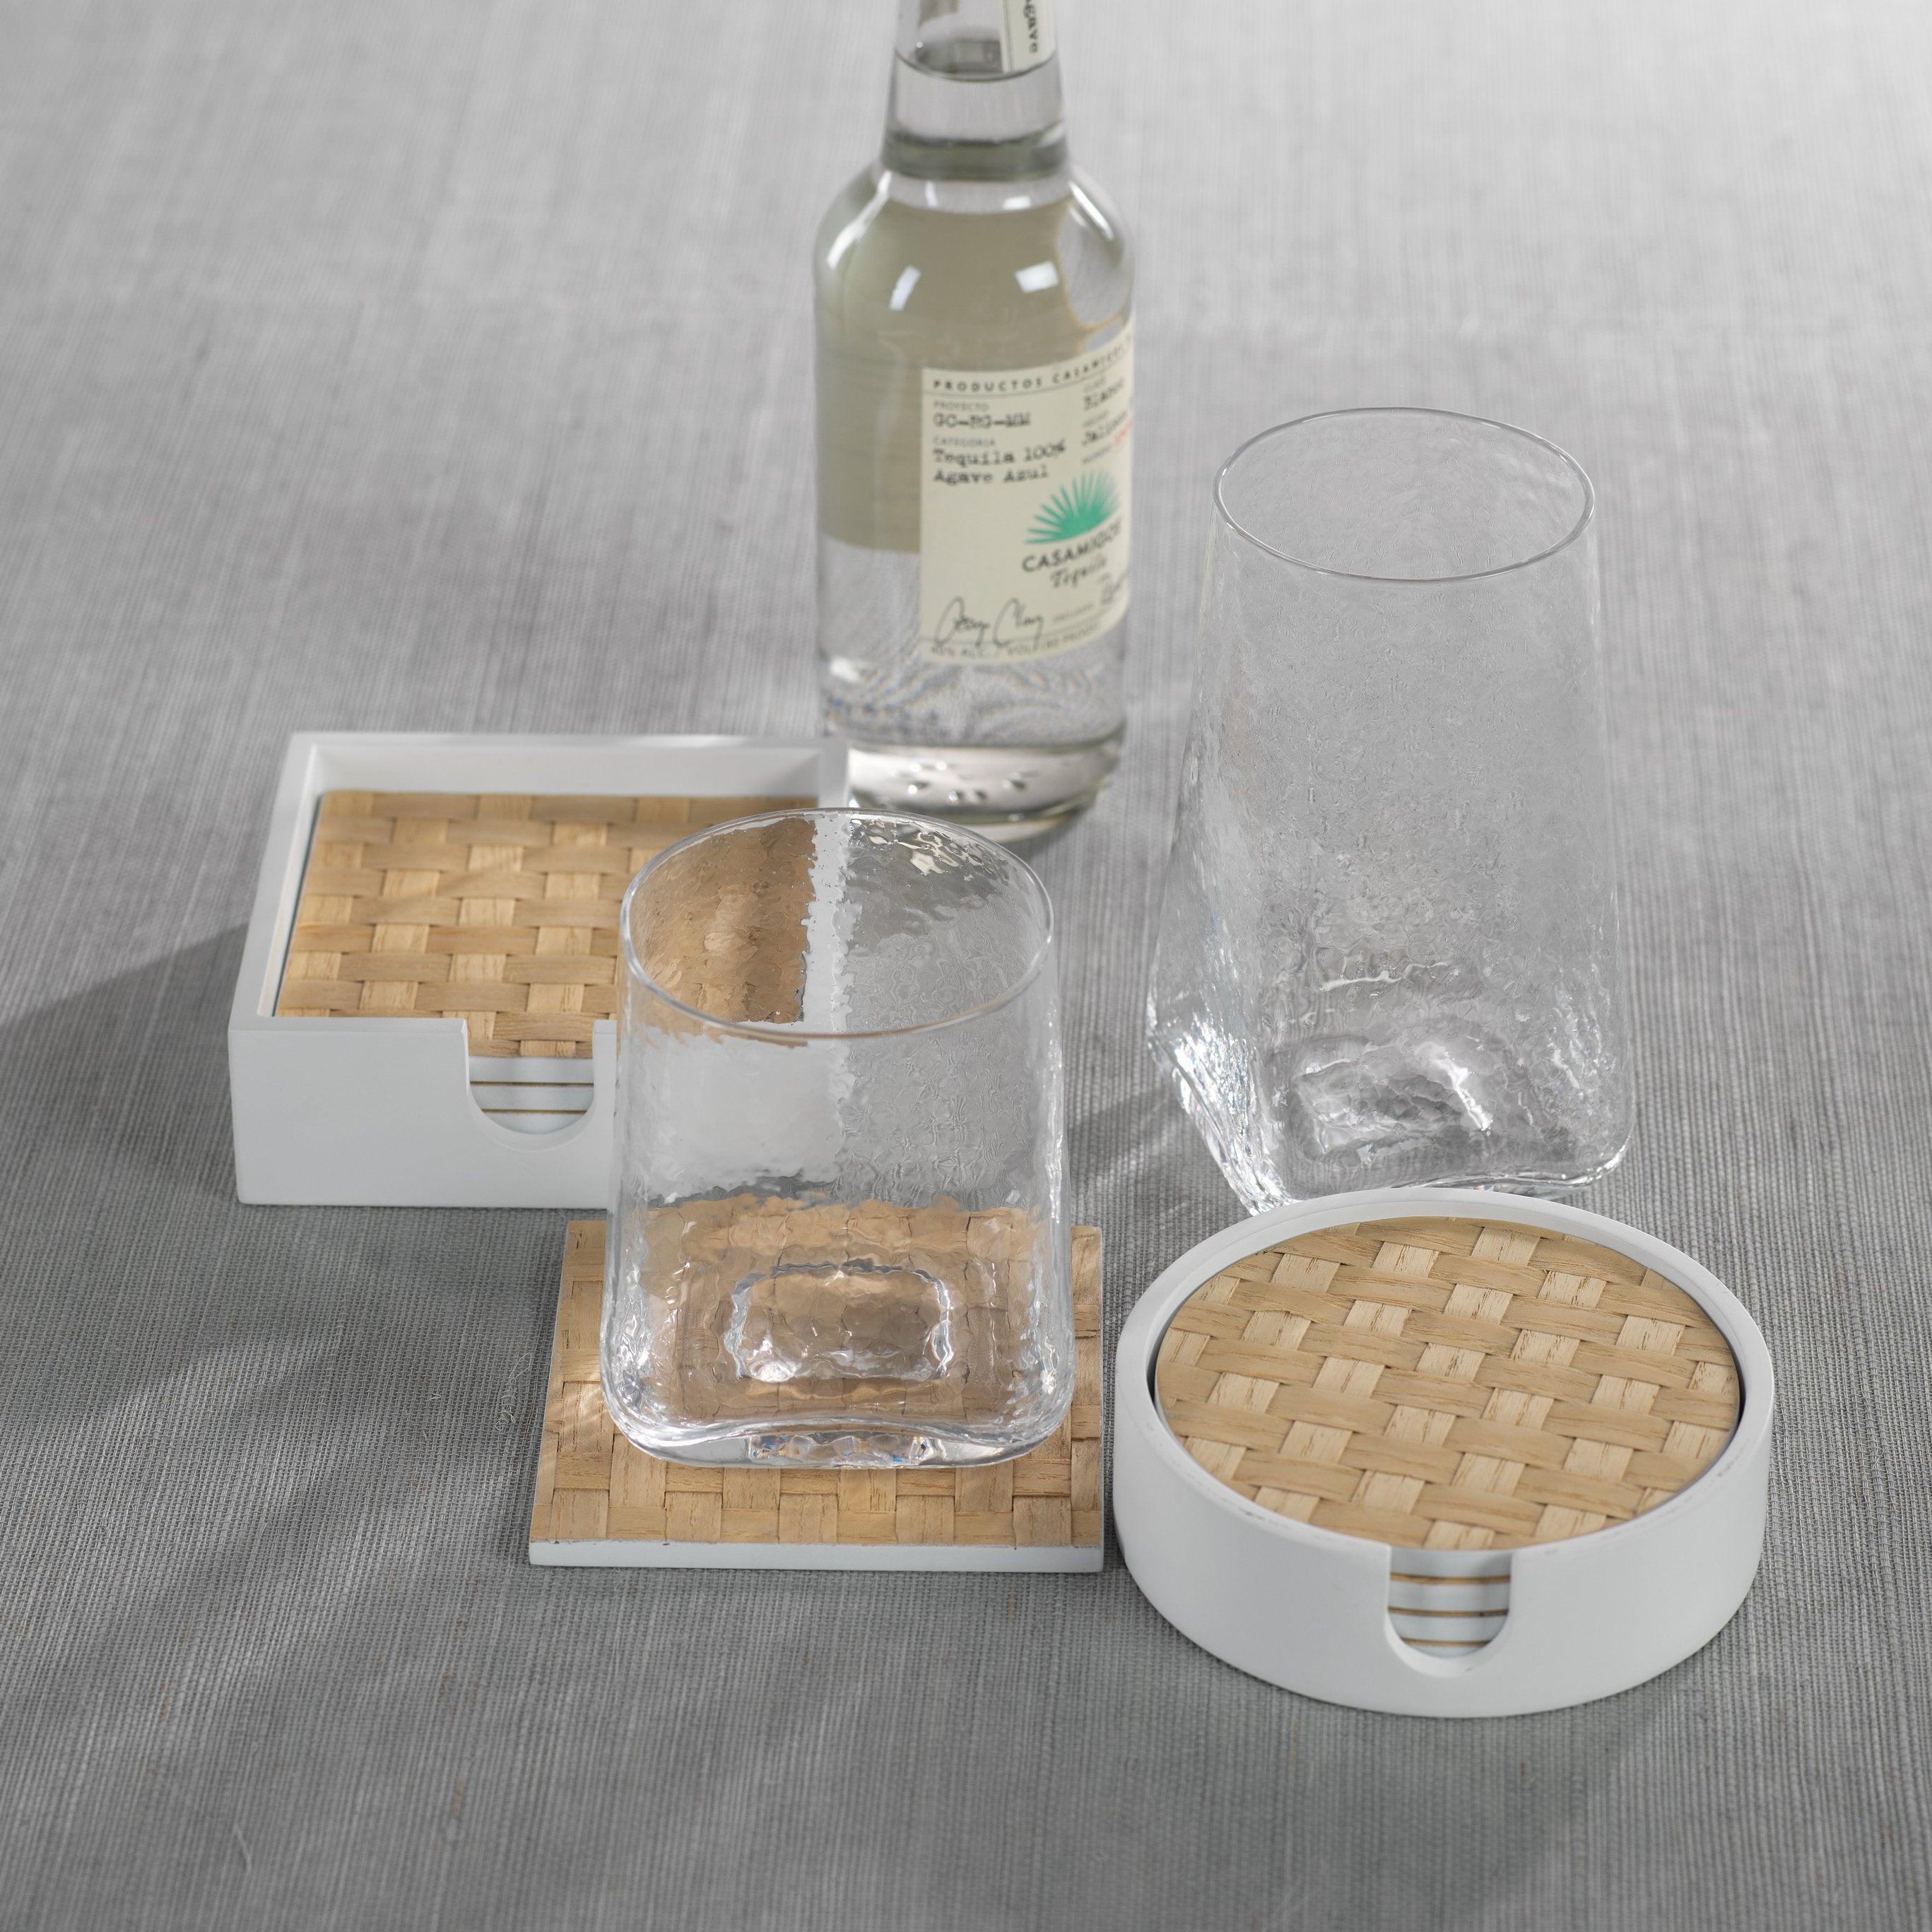 S/4 Woven Ash Coaster in White Tray - CARLYLE AVENUE